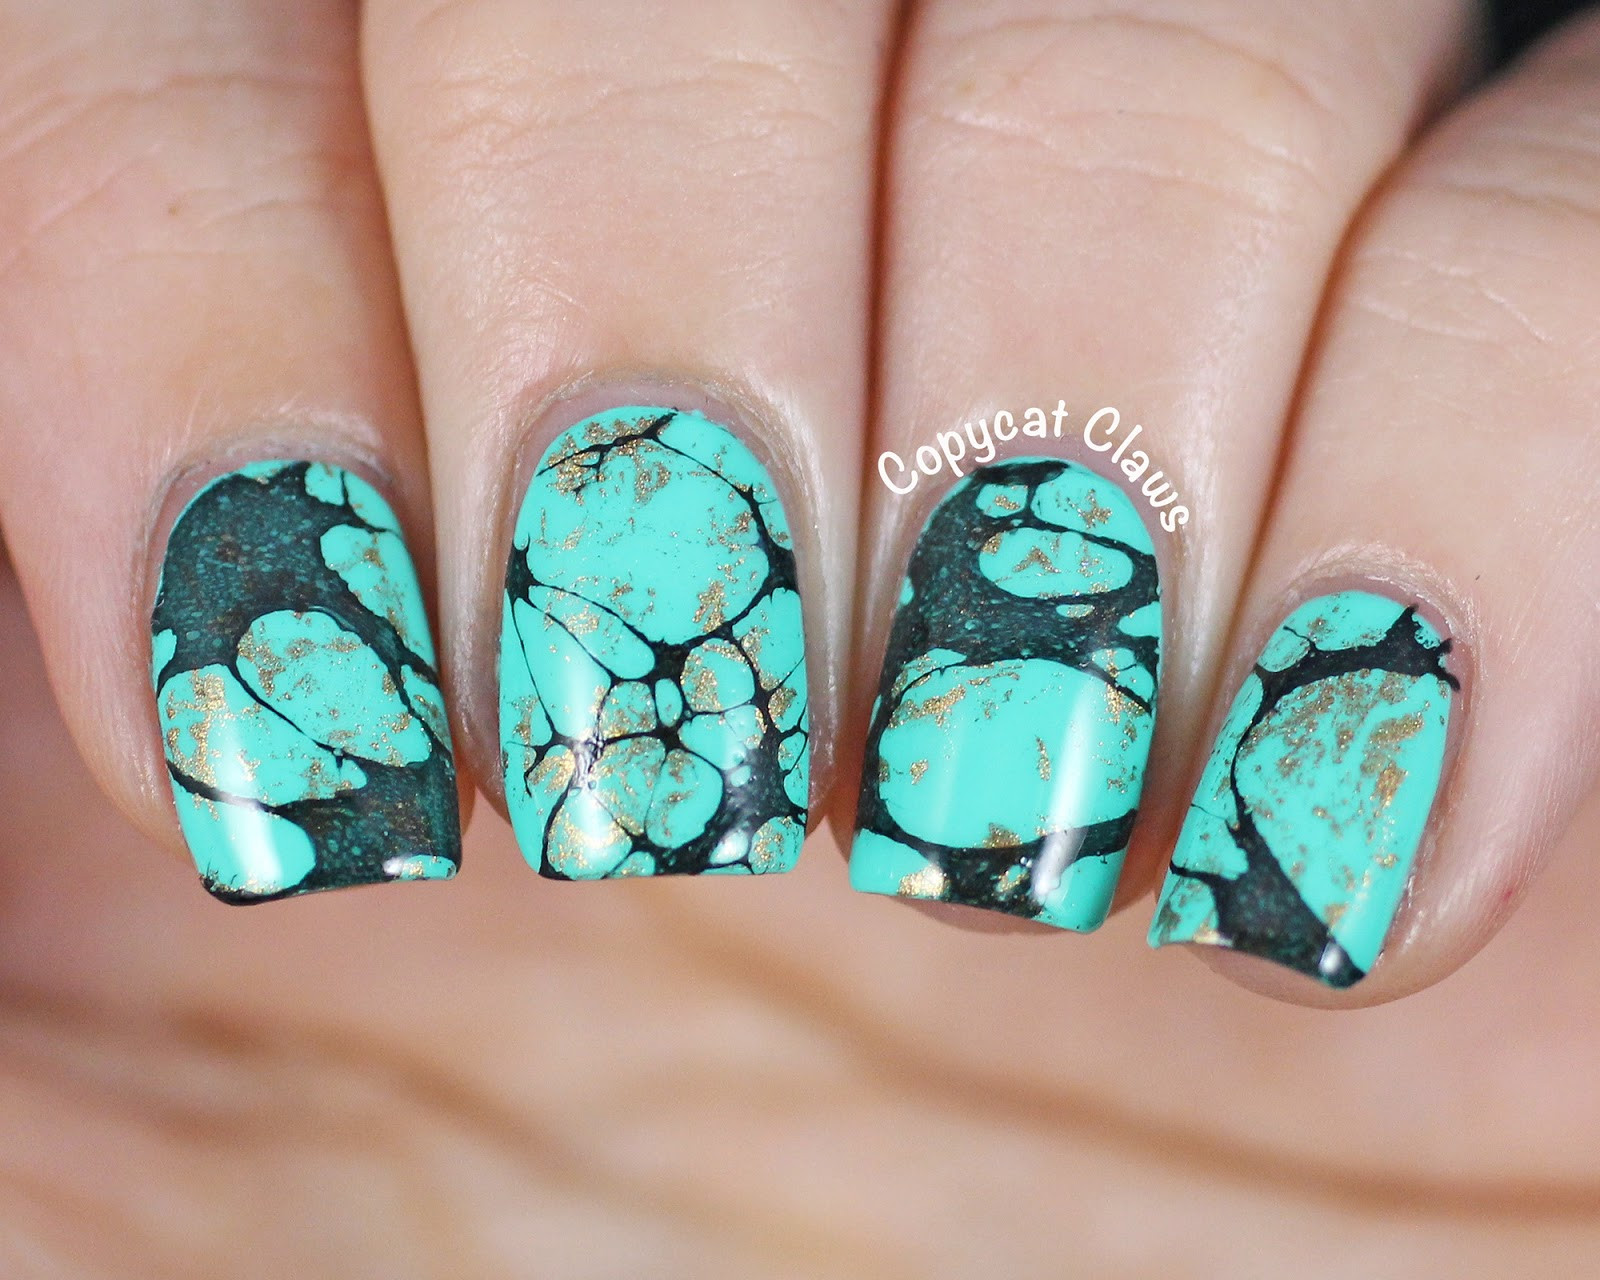 Turquoise Nail Designs
 Copycat Claws Turquoise Stone Nail Art & China Glaze Too